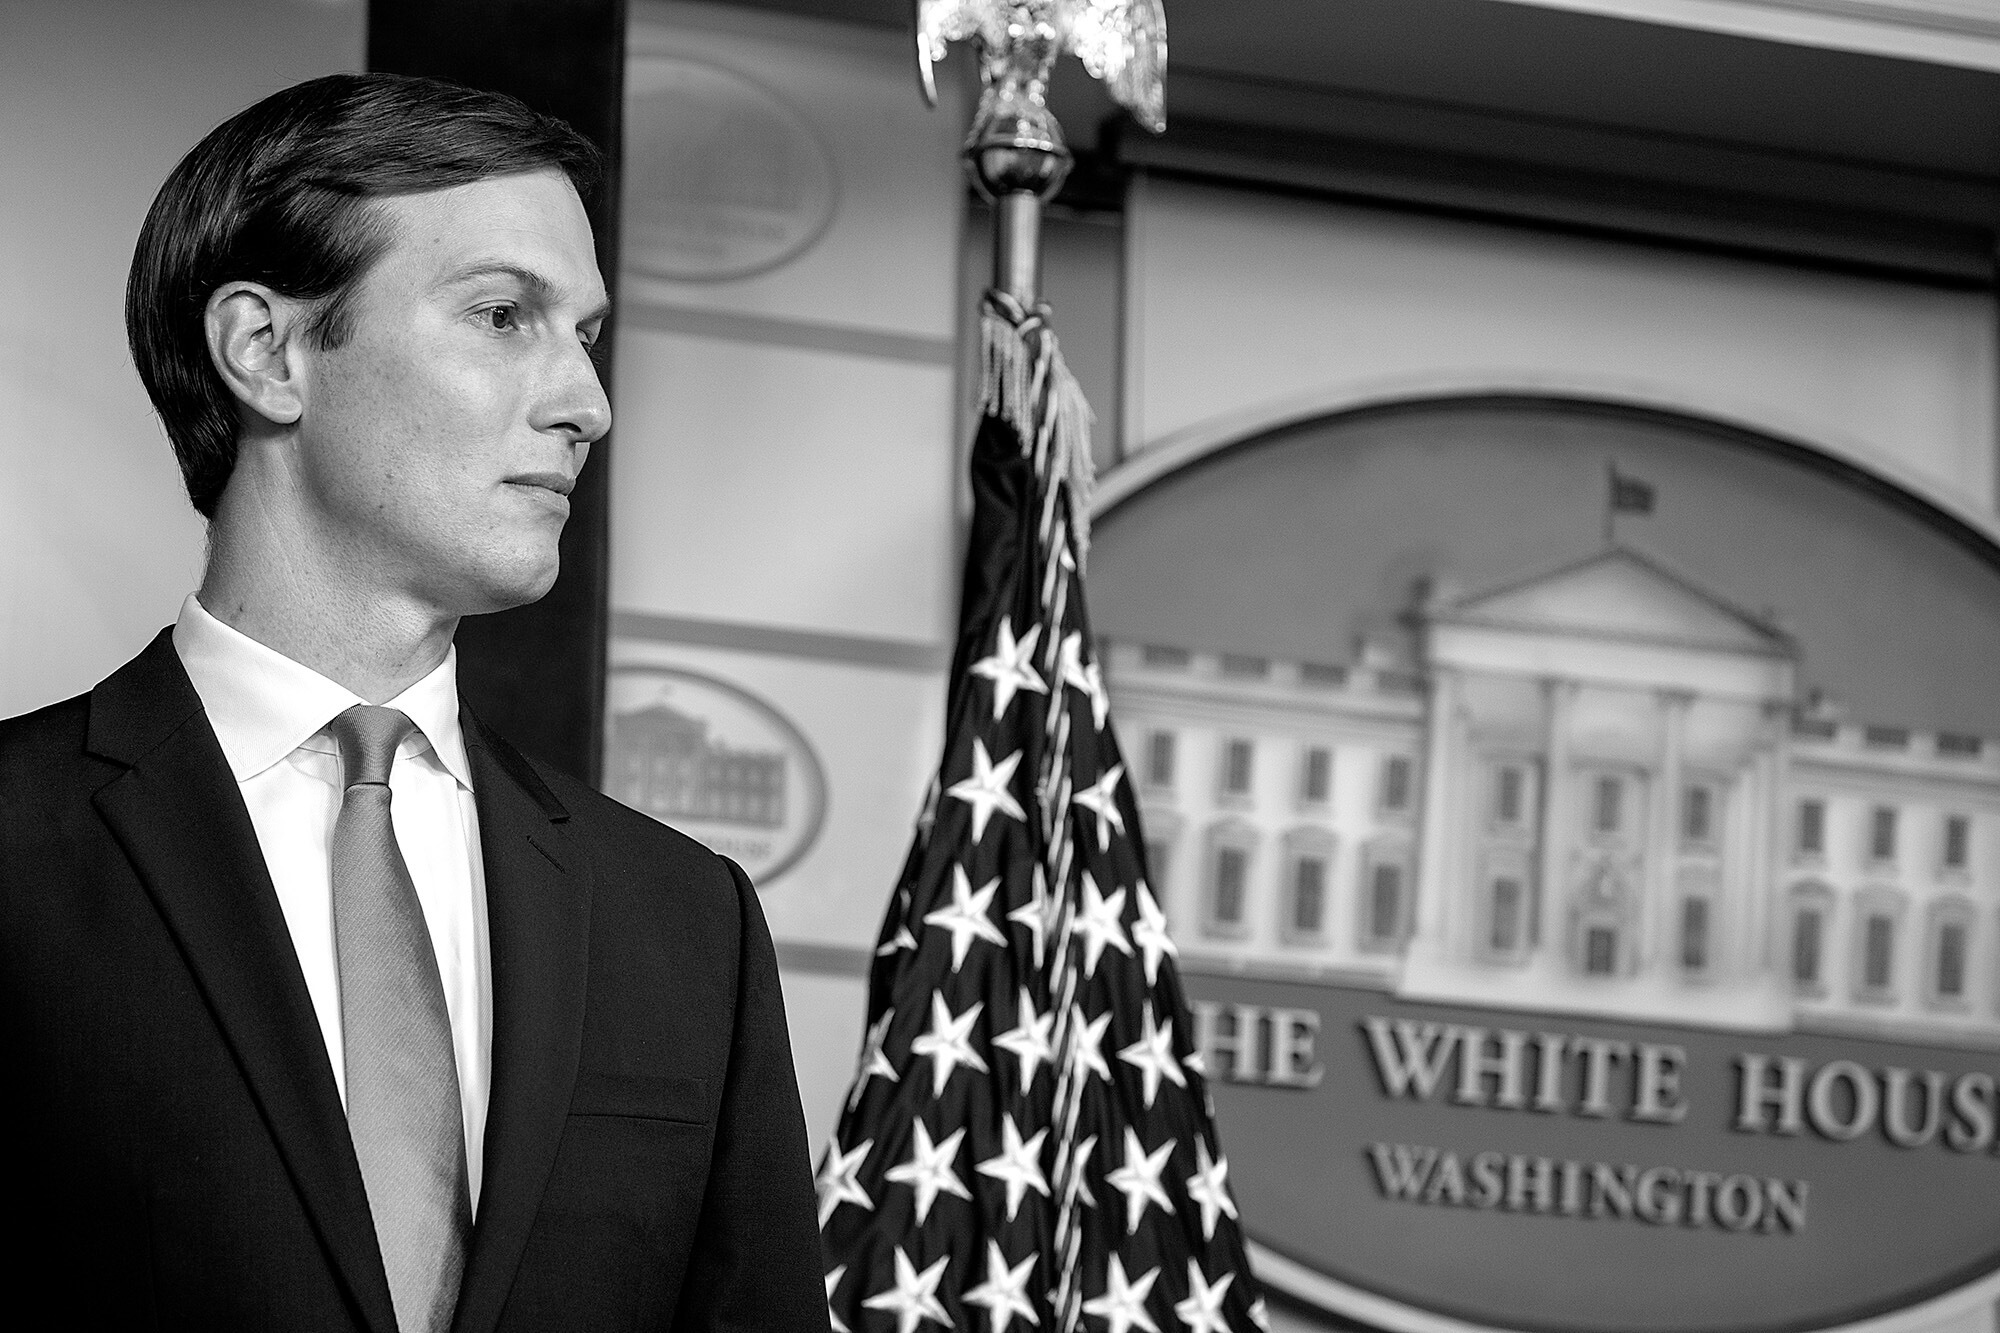 Donald Trump’s decision to appoint his own family members to high-ranking White House positions resulted in disastrous policy choices, as was the case when his son-in-law Jared Kushner took a leading role in the administration’s pandemic response despite his lack of experience.